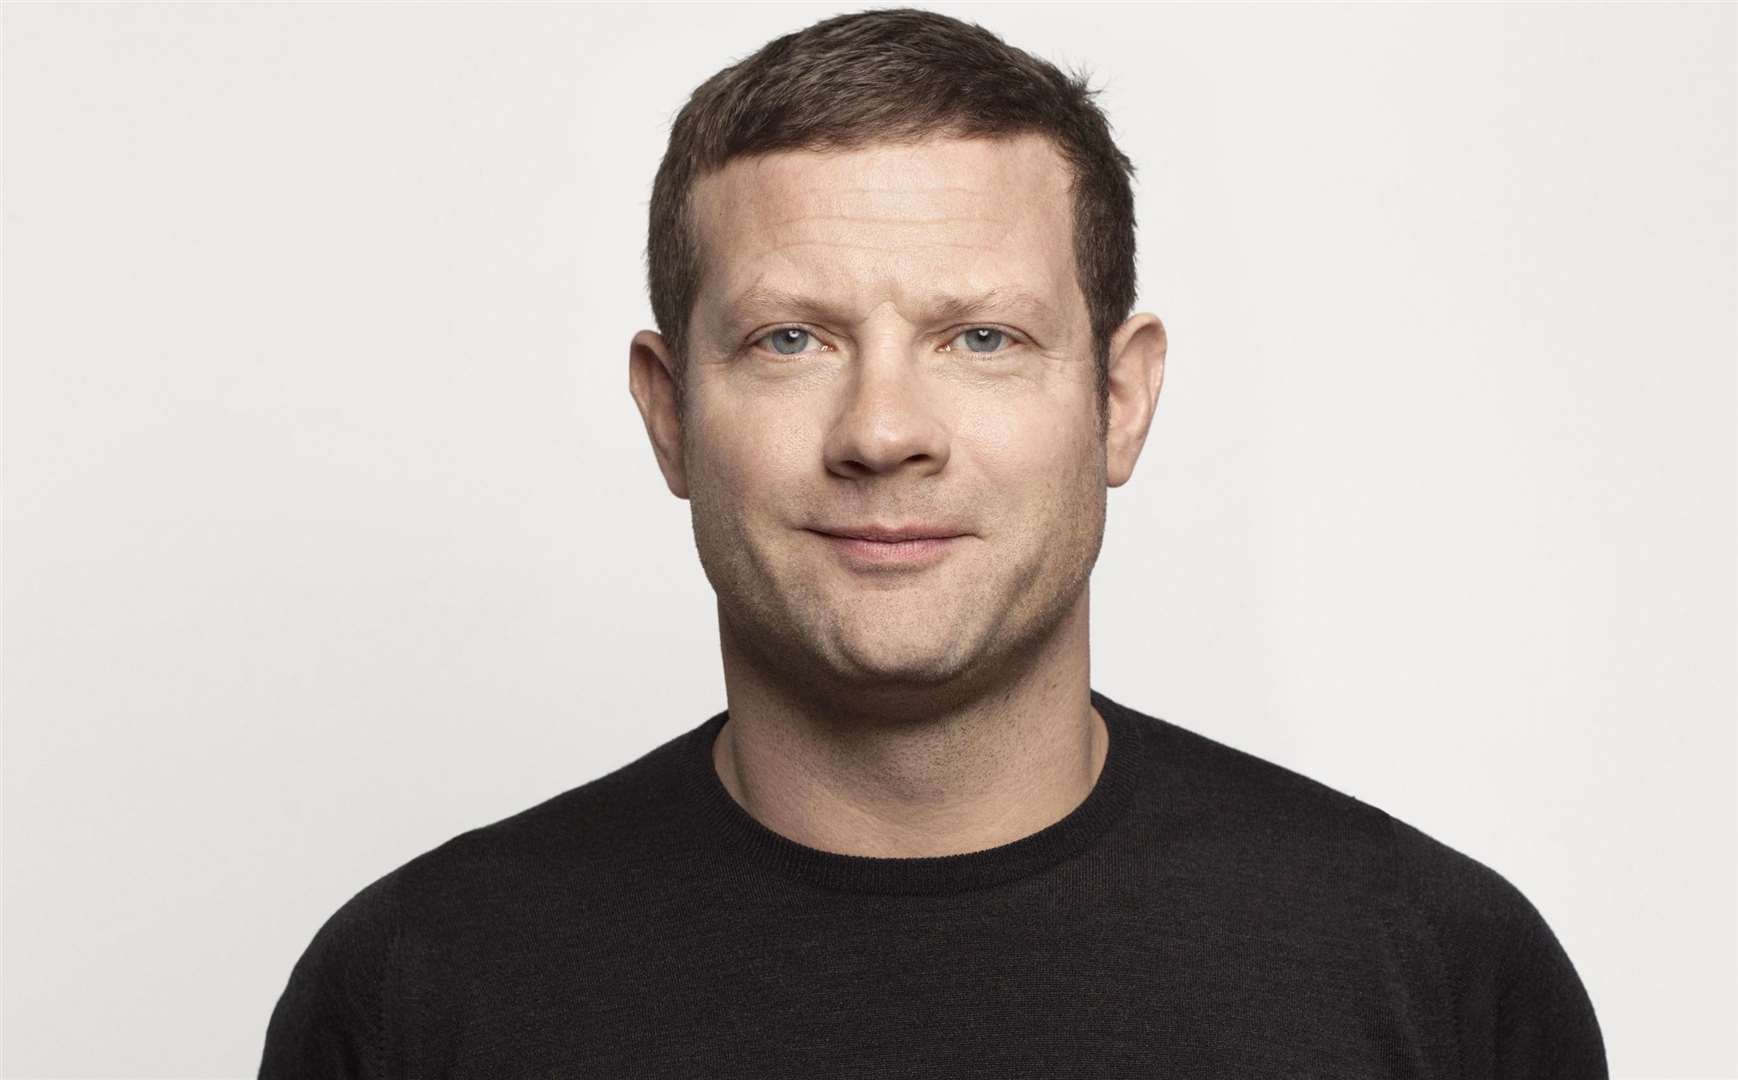 Dermot O’Leary will be part of the team leading the coverage for BBC One